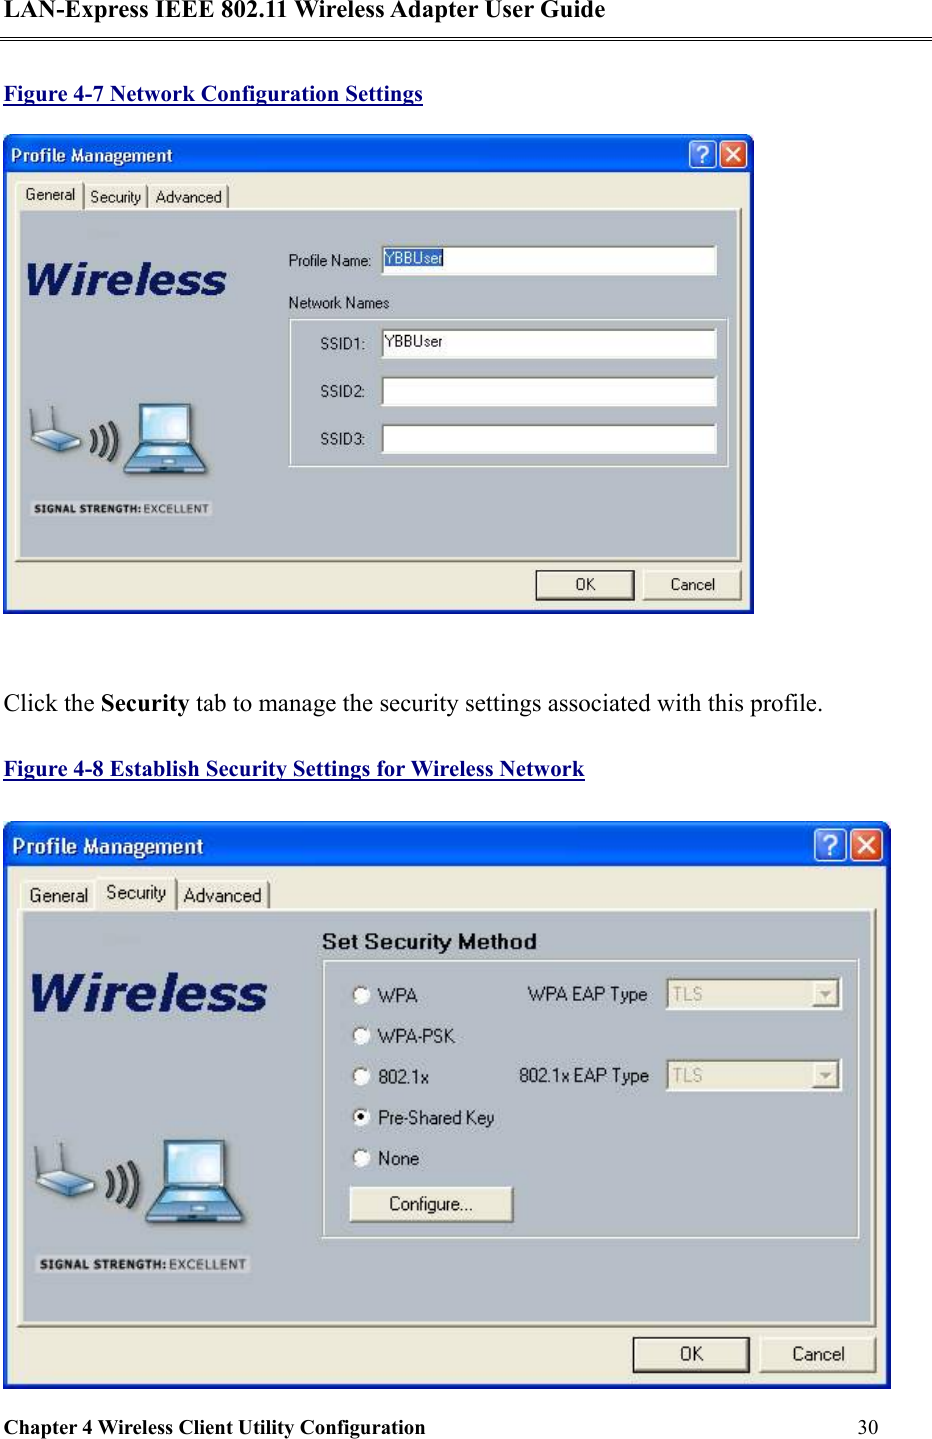 LAN-Express IEEE 802.11 Wireless Adapter User Guide Chapter 4 Wireless Client Utility Configuration   30  Figure 4-7 Network Configuration Settings    Click the Security tab to manage the security settings associated with this profile. Figure 4-8 Establish Security Settings for Wireless Network  